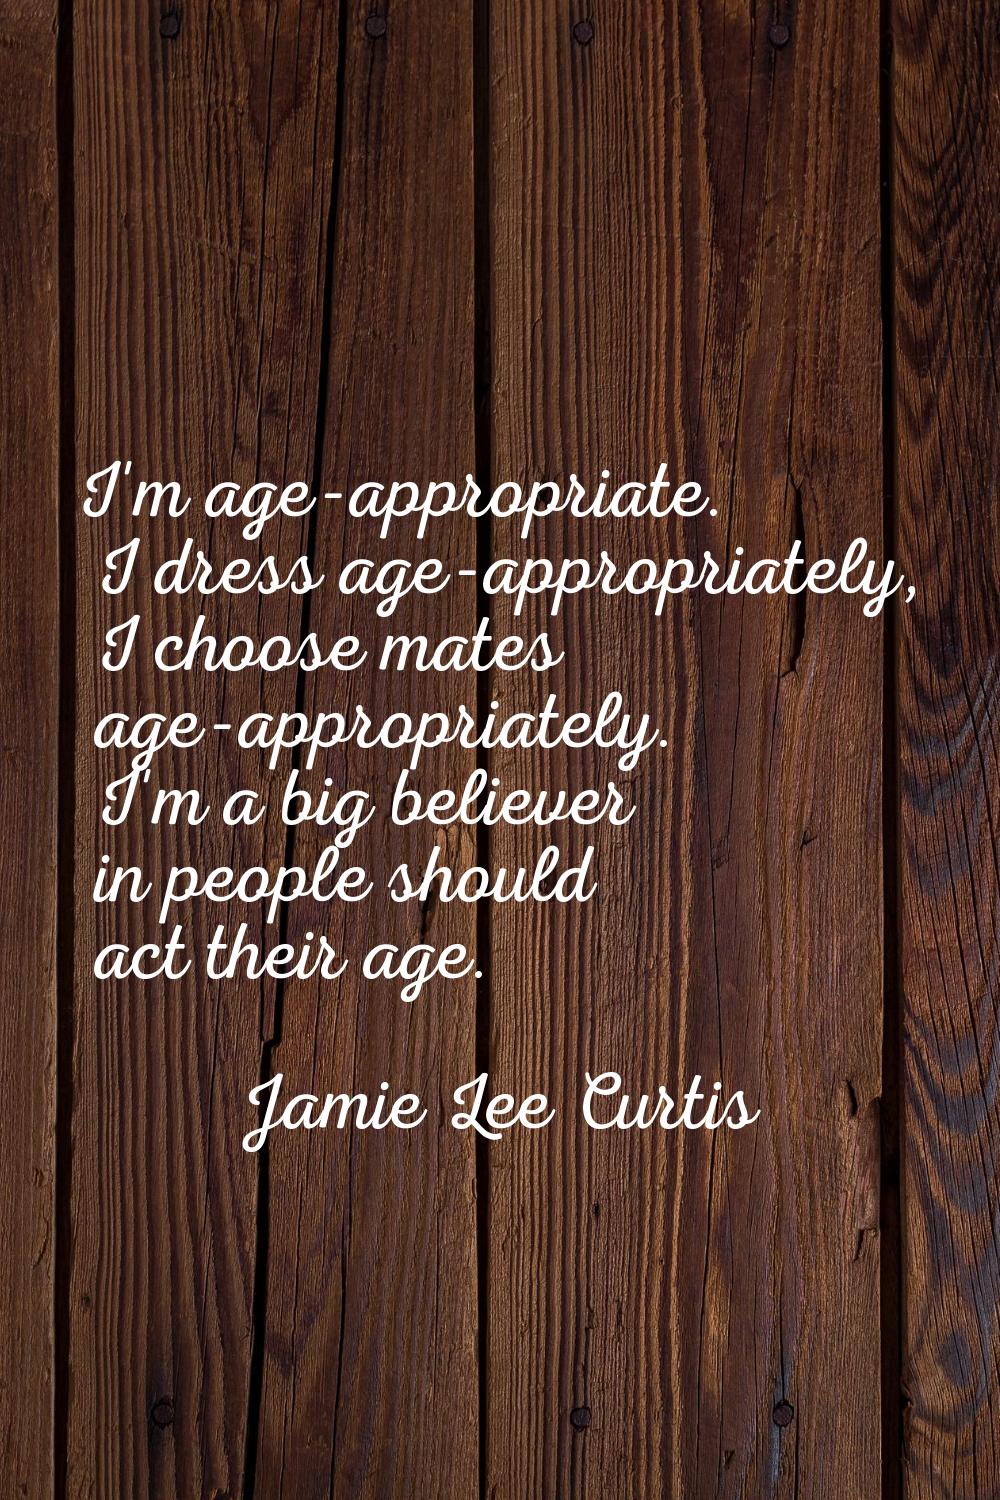 I'm age-appropriate. I dress age-appropriately, I choose mates age-appropriately. I'm a big believe